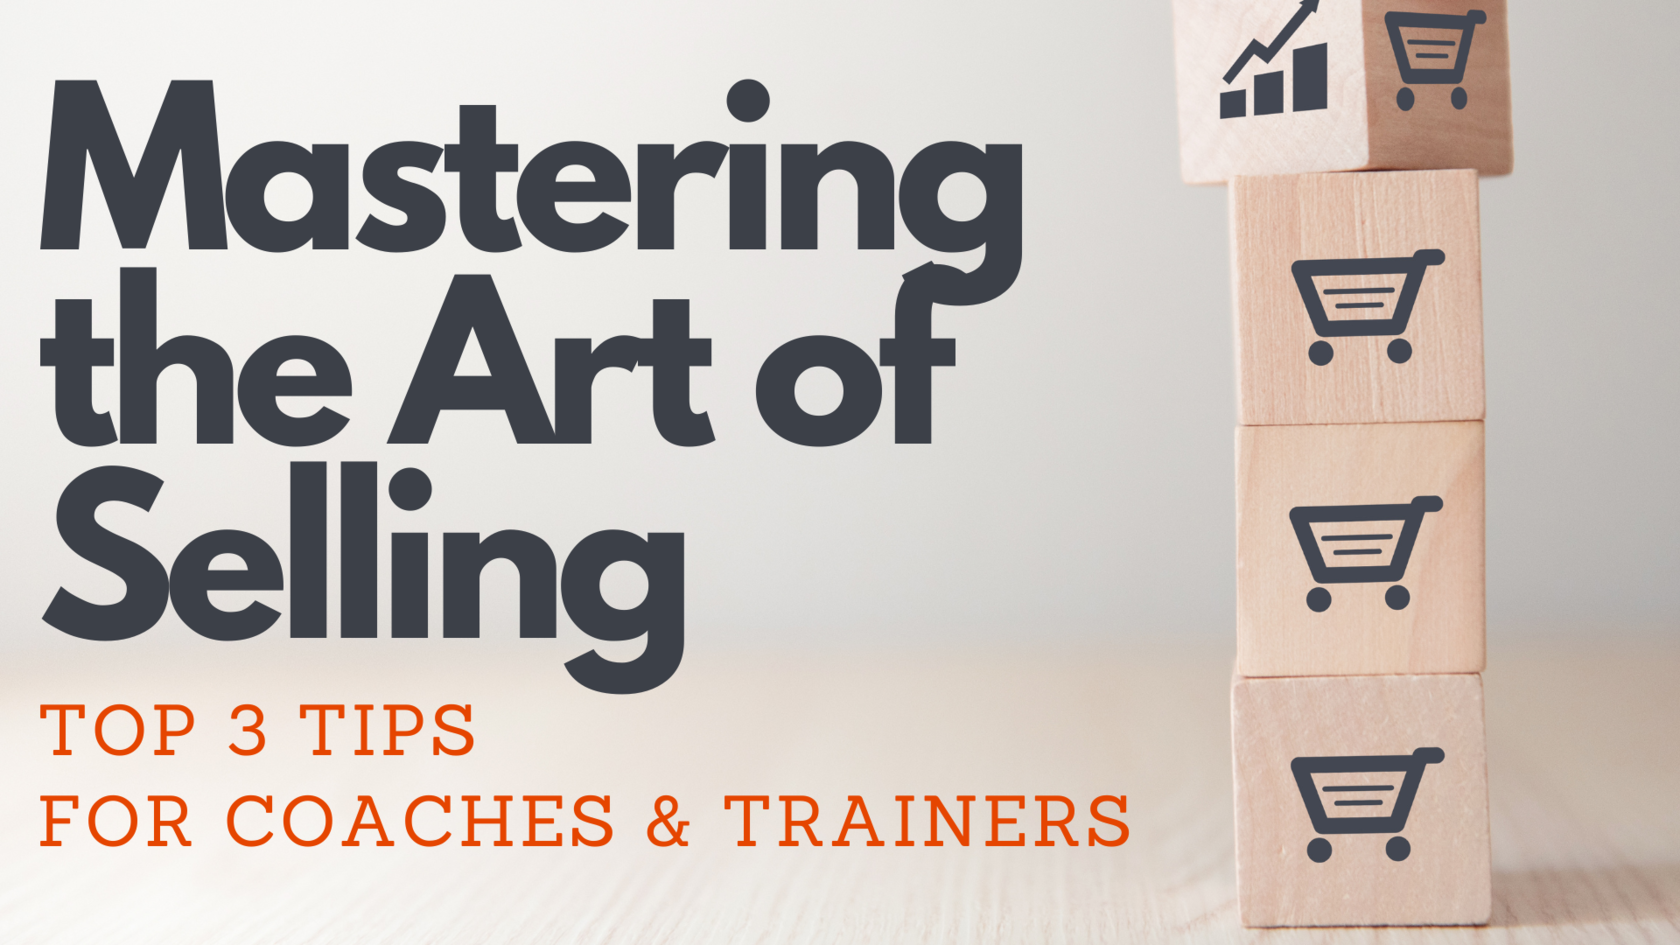 Mastering the art of selling top 3 tips for coaches &amp; trainers 4 wooden blocks stacked vertically with shopping cart designs on them